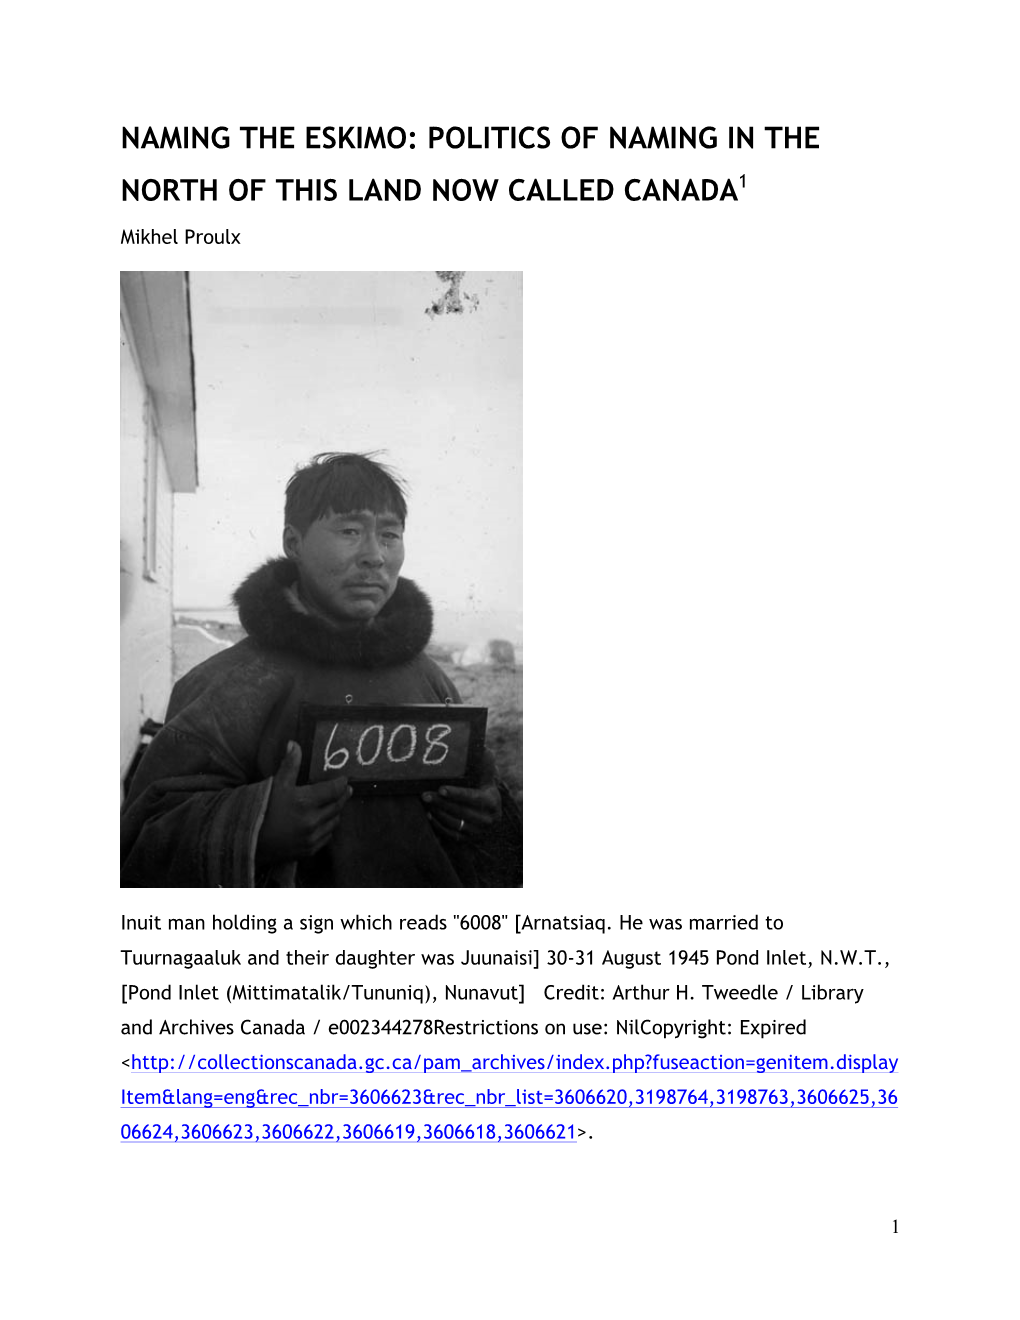 Naming the Eskimo: Politics of Naming in the North of This Land Now Called Canada1